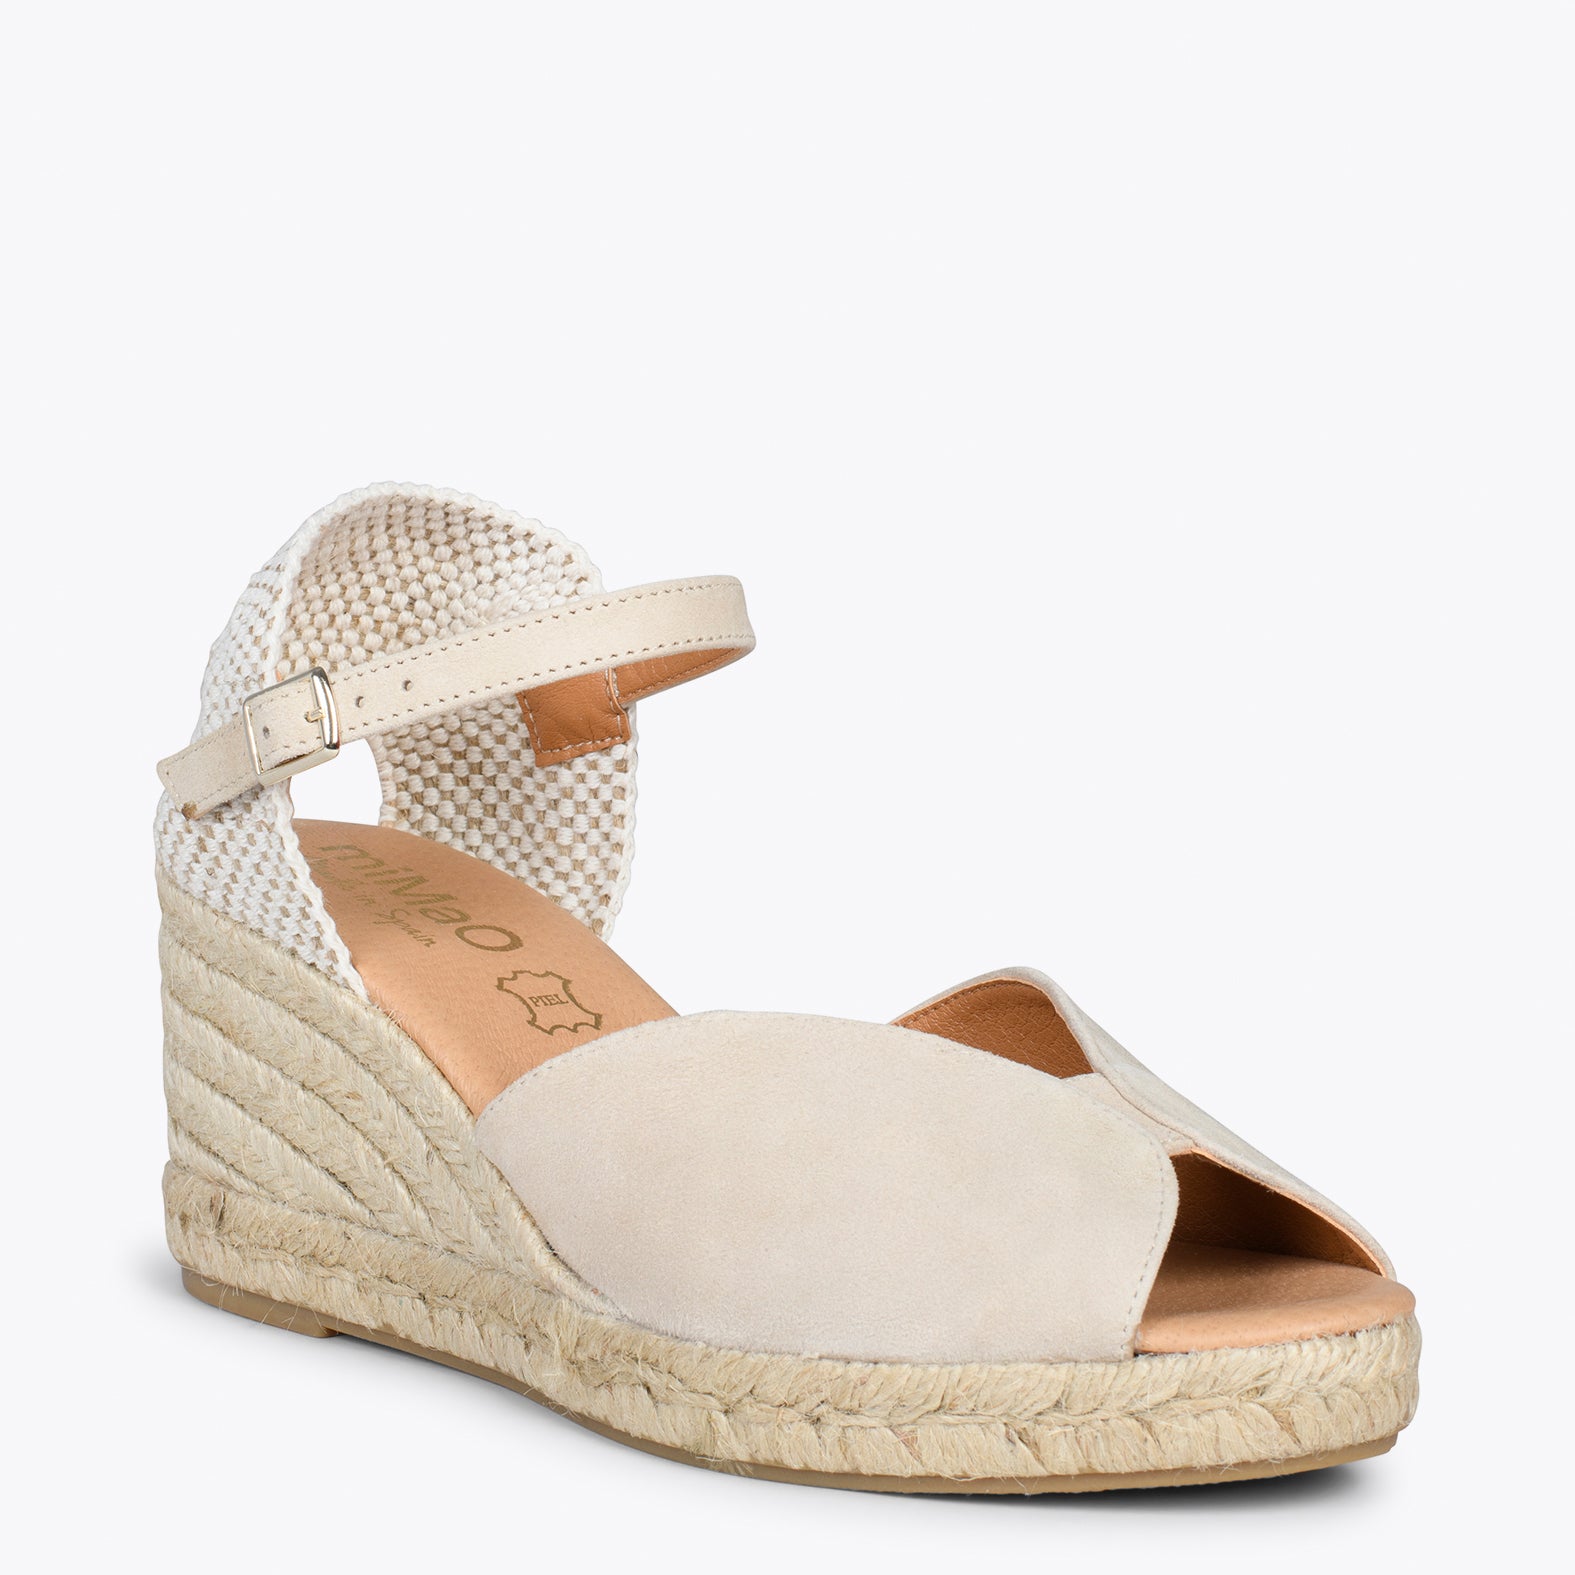 SITGES – BEIGE espadrille wedges with double shovel